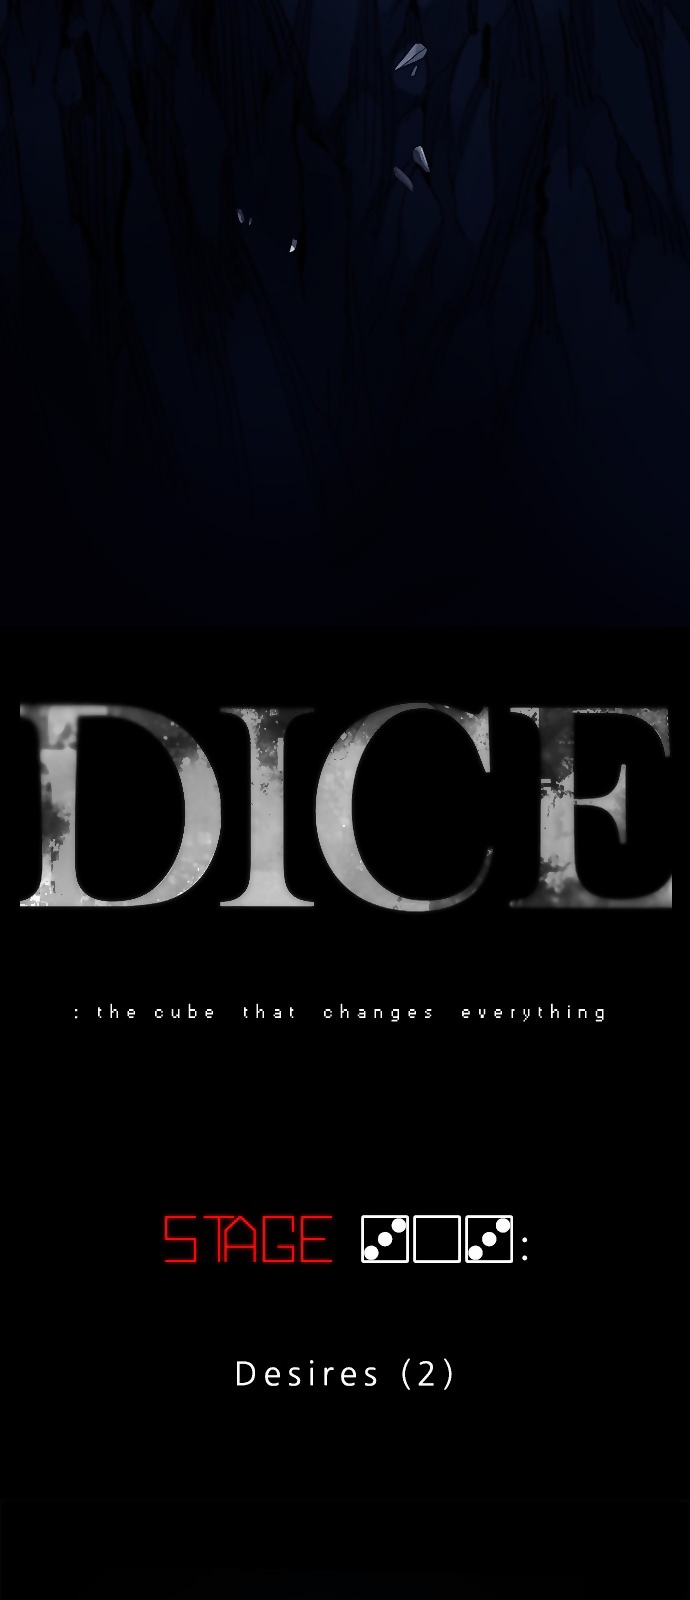 DICE: The Cube That Changes Everything Ch. 303 Desires (2)